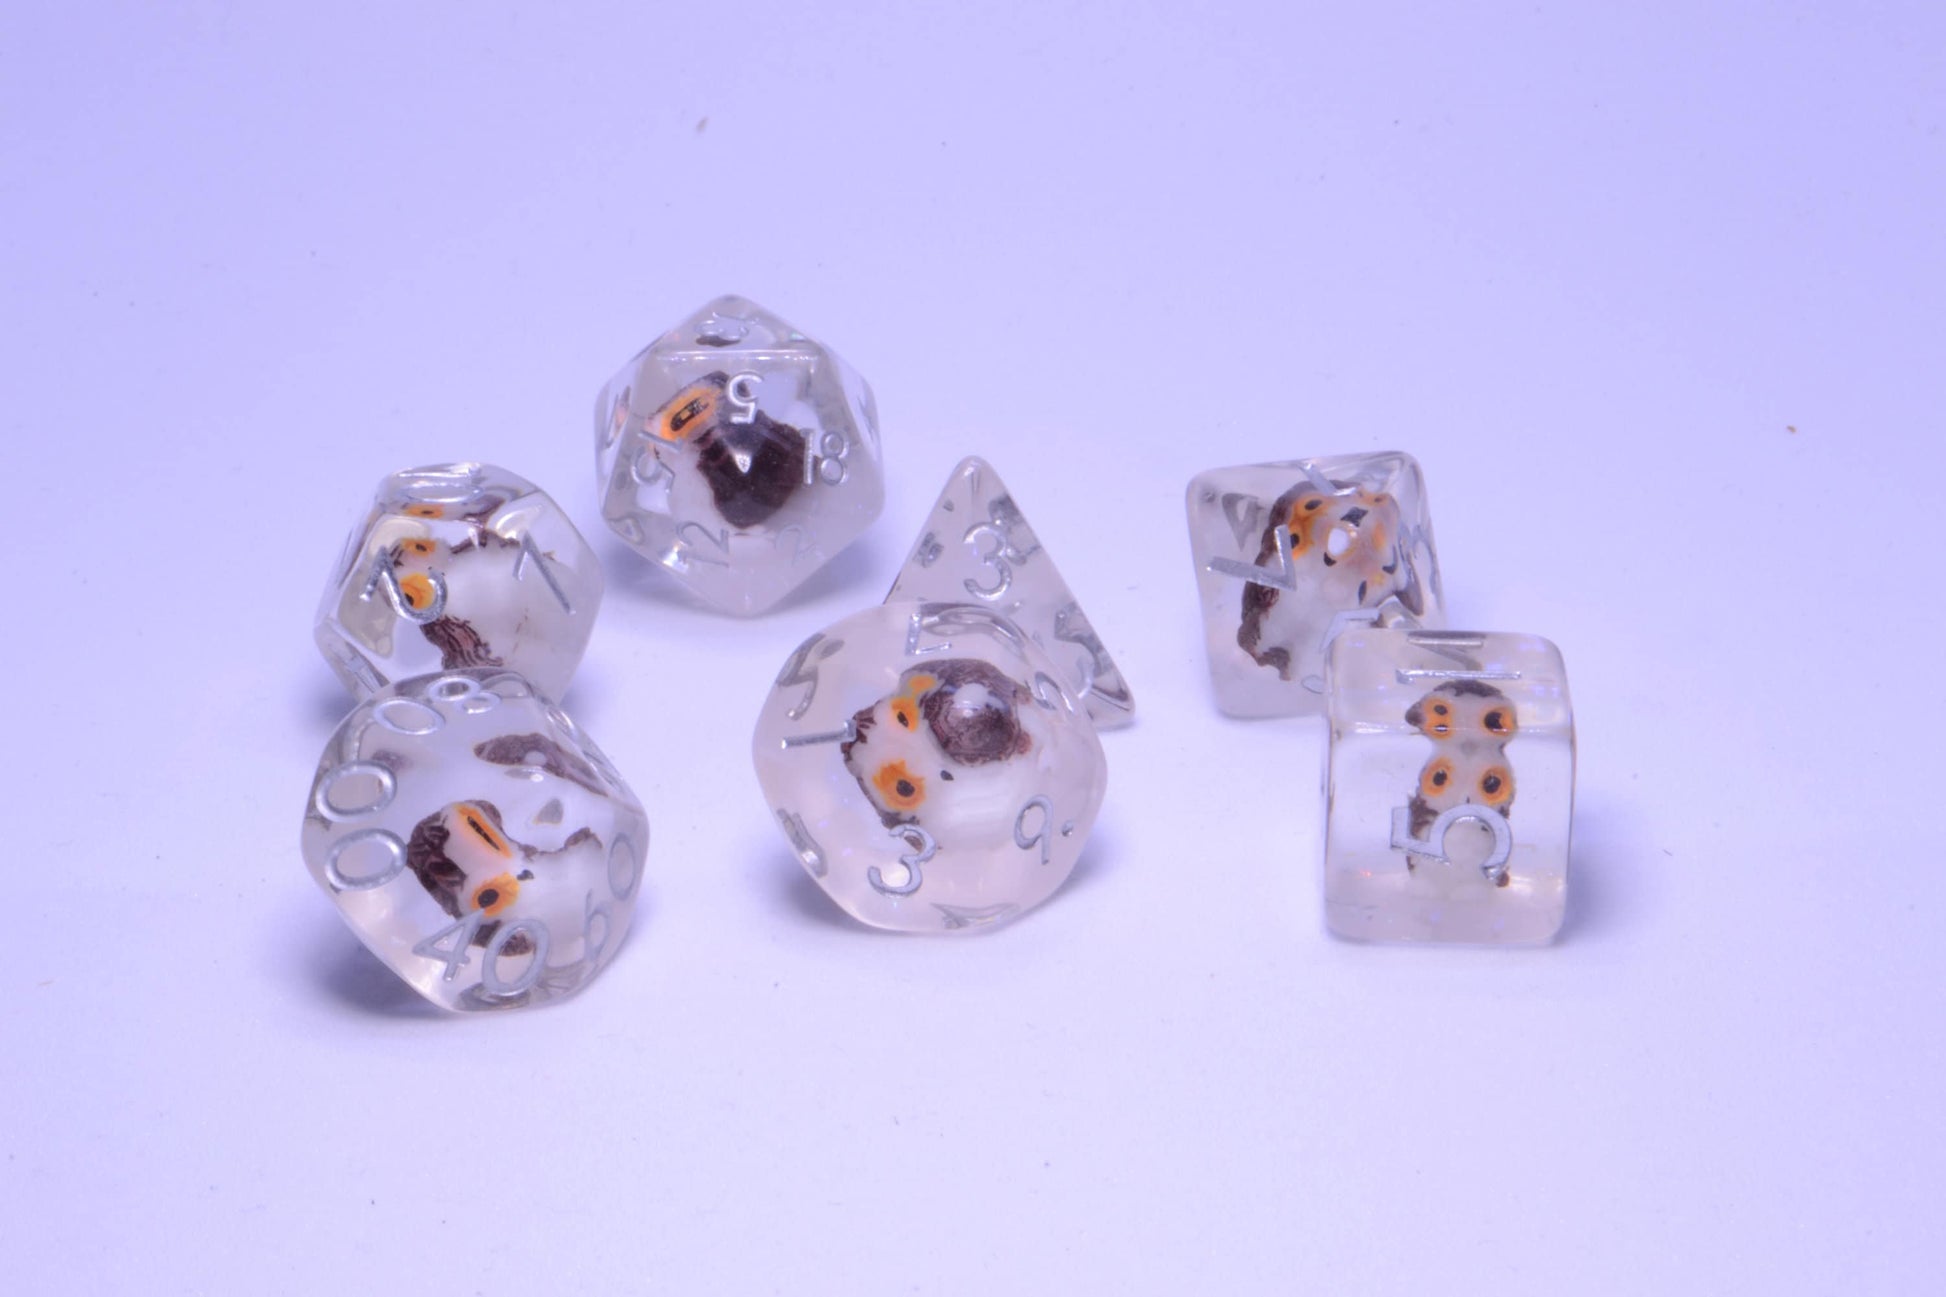 Wisdom of the Owl - A Wise Owl Encased Soft Resin D&D Dice Set With Silver Numbering - For Dungeons and Dragons - Gift Set